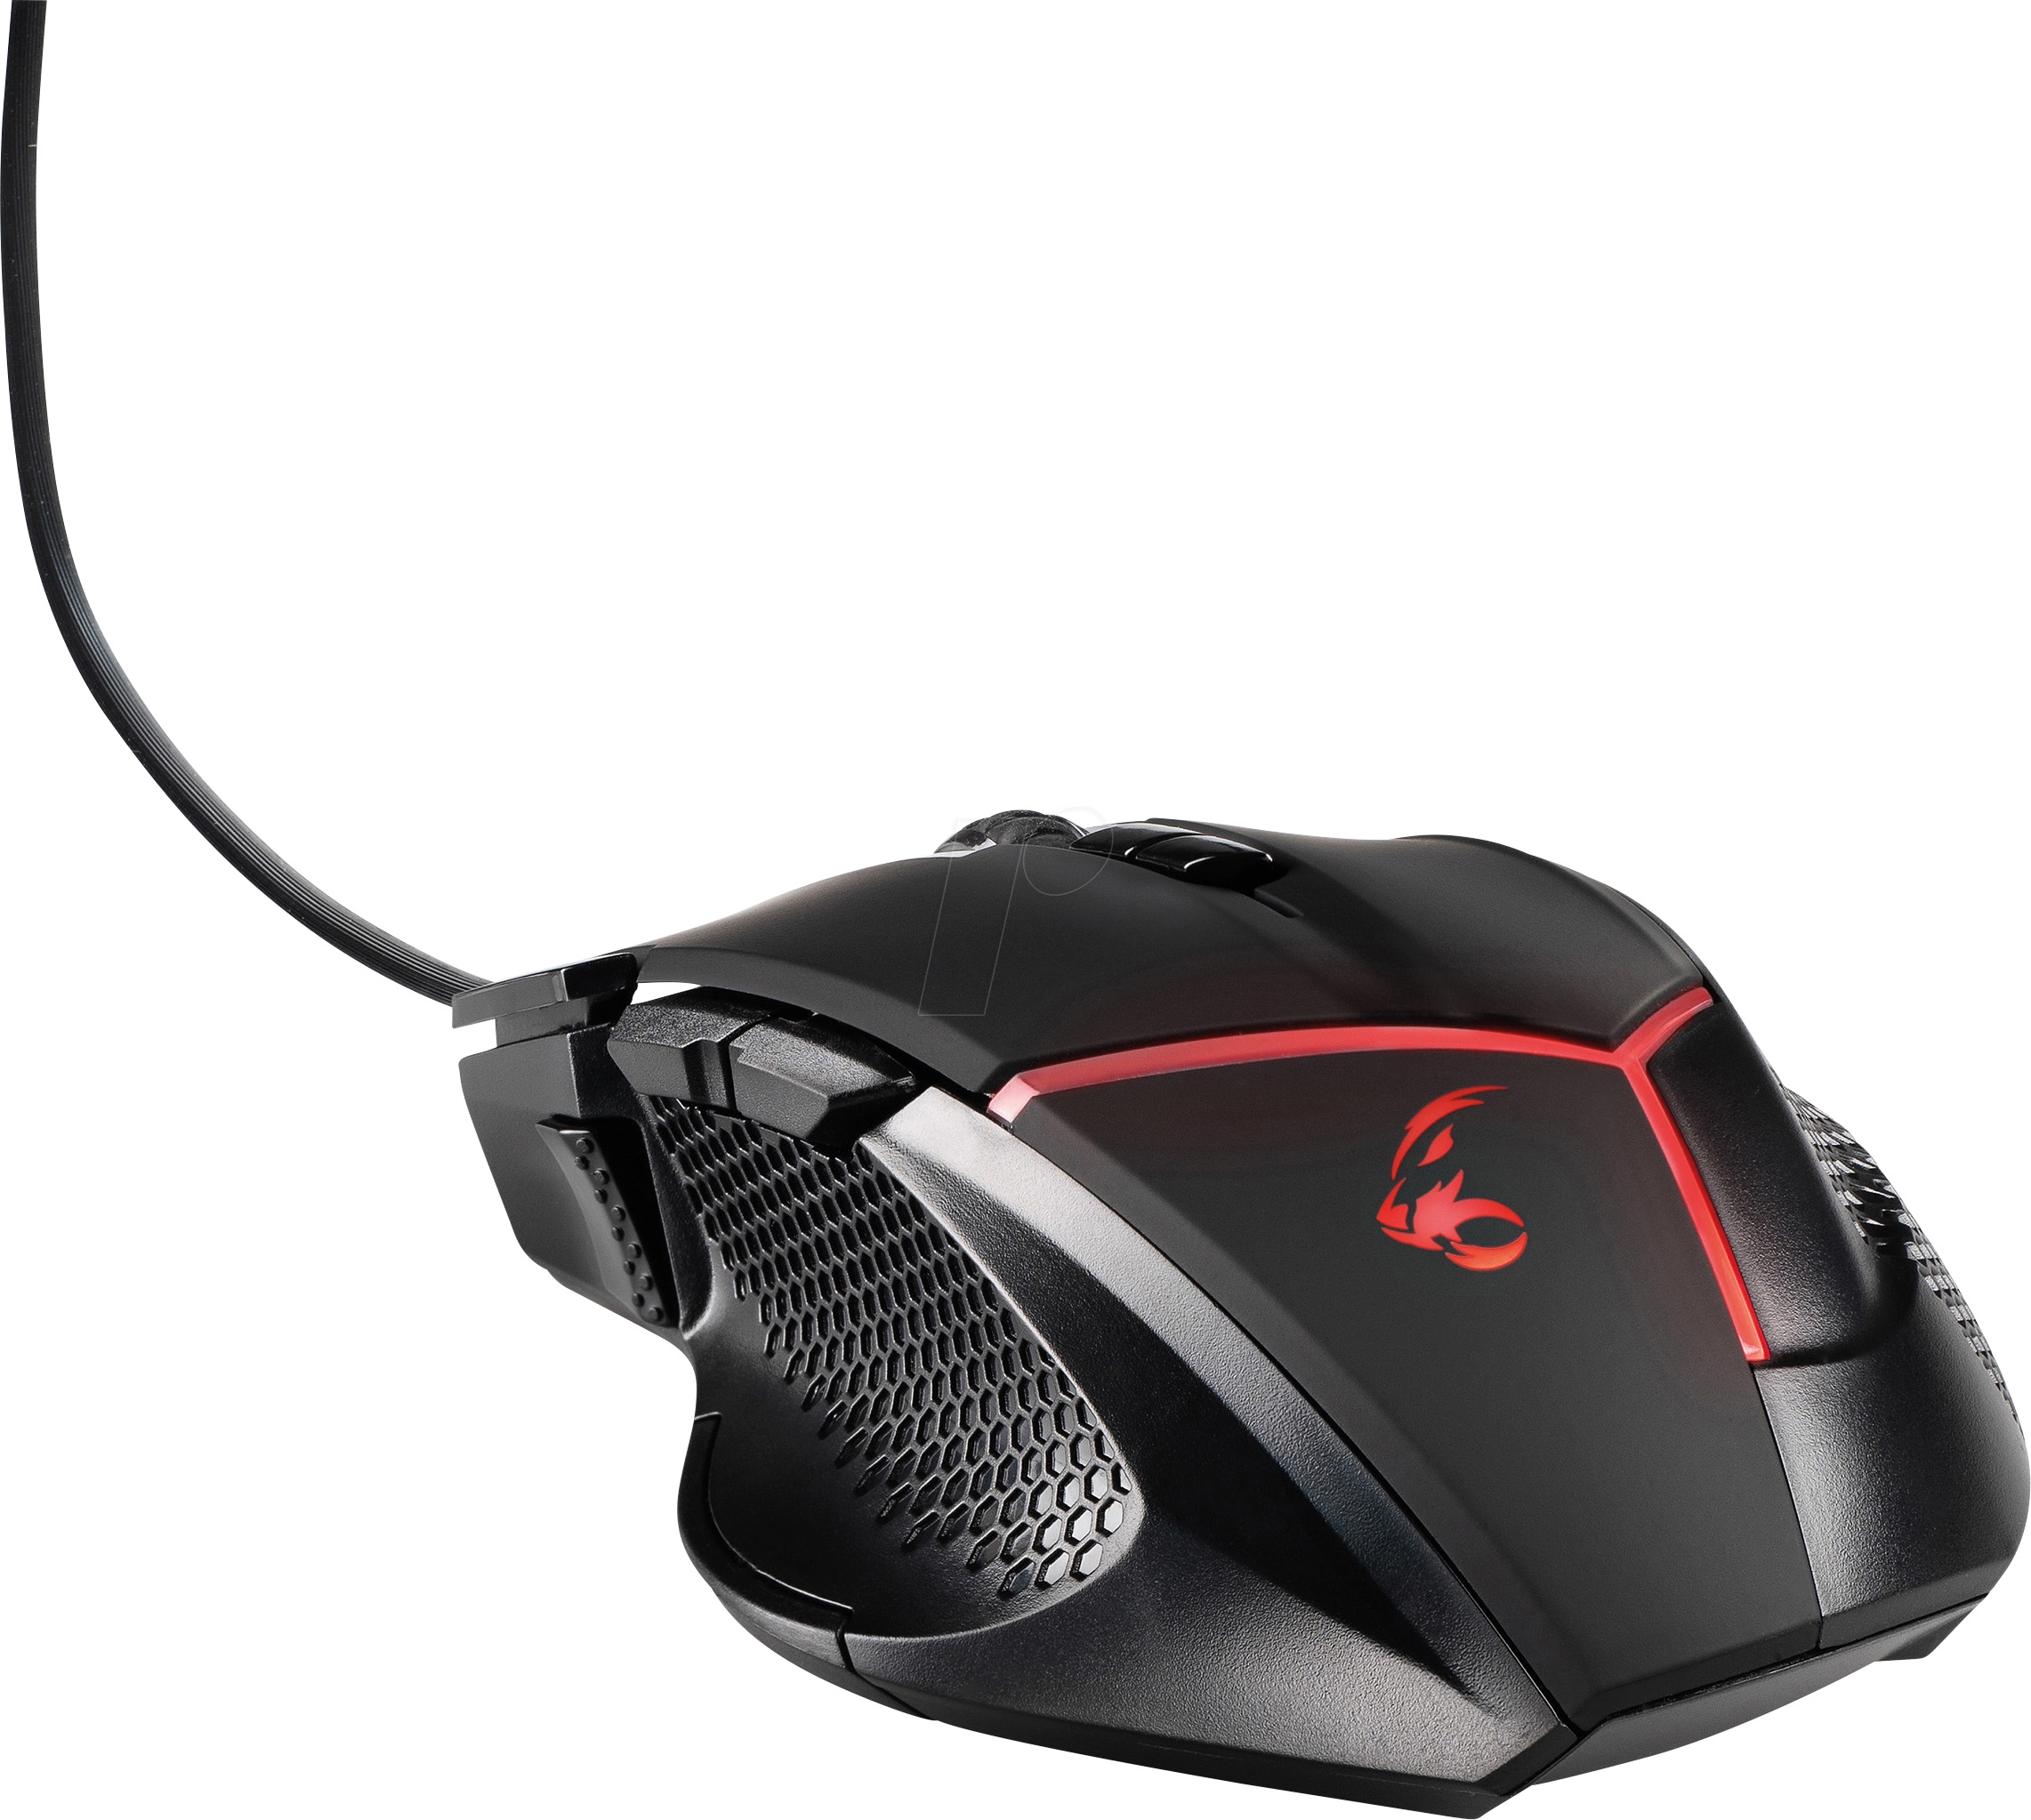 MediaRange GS200 High Precision Gaming Mouse